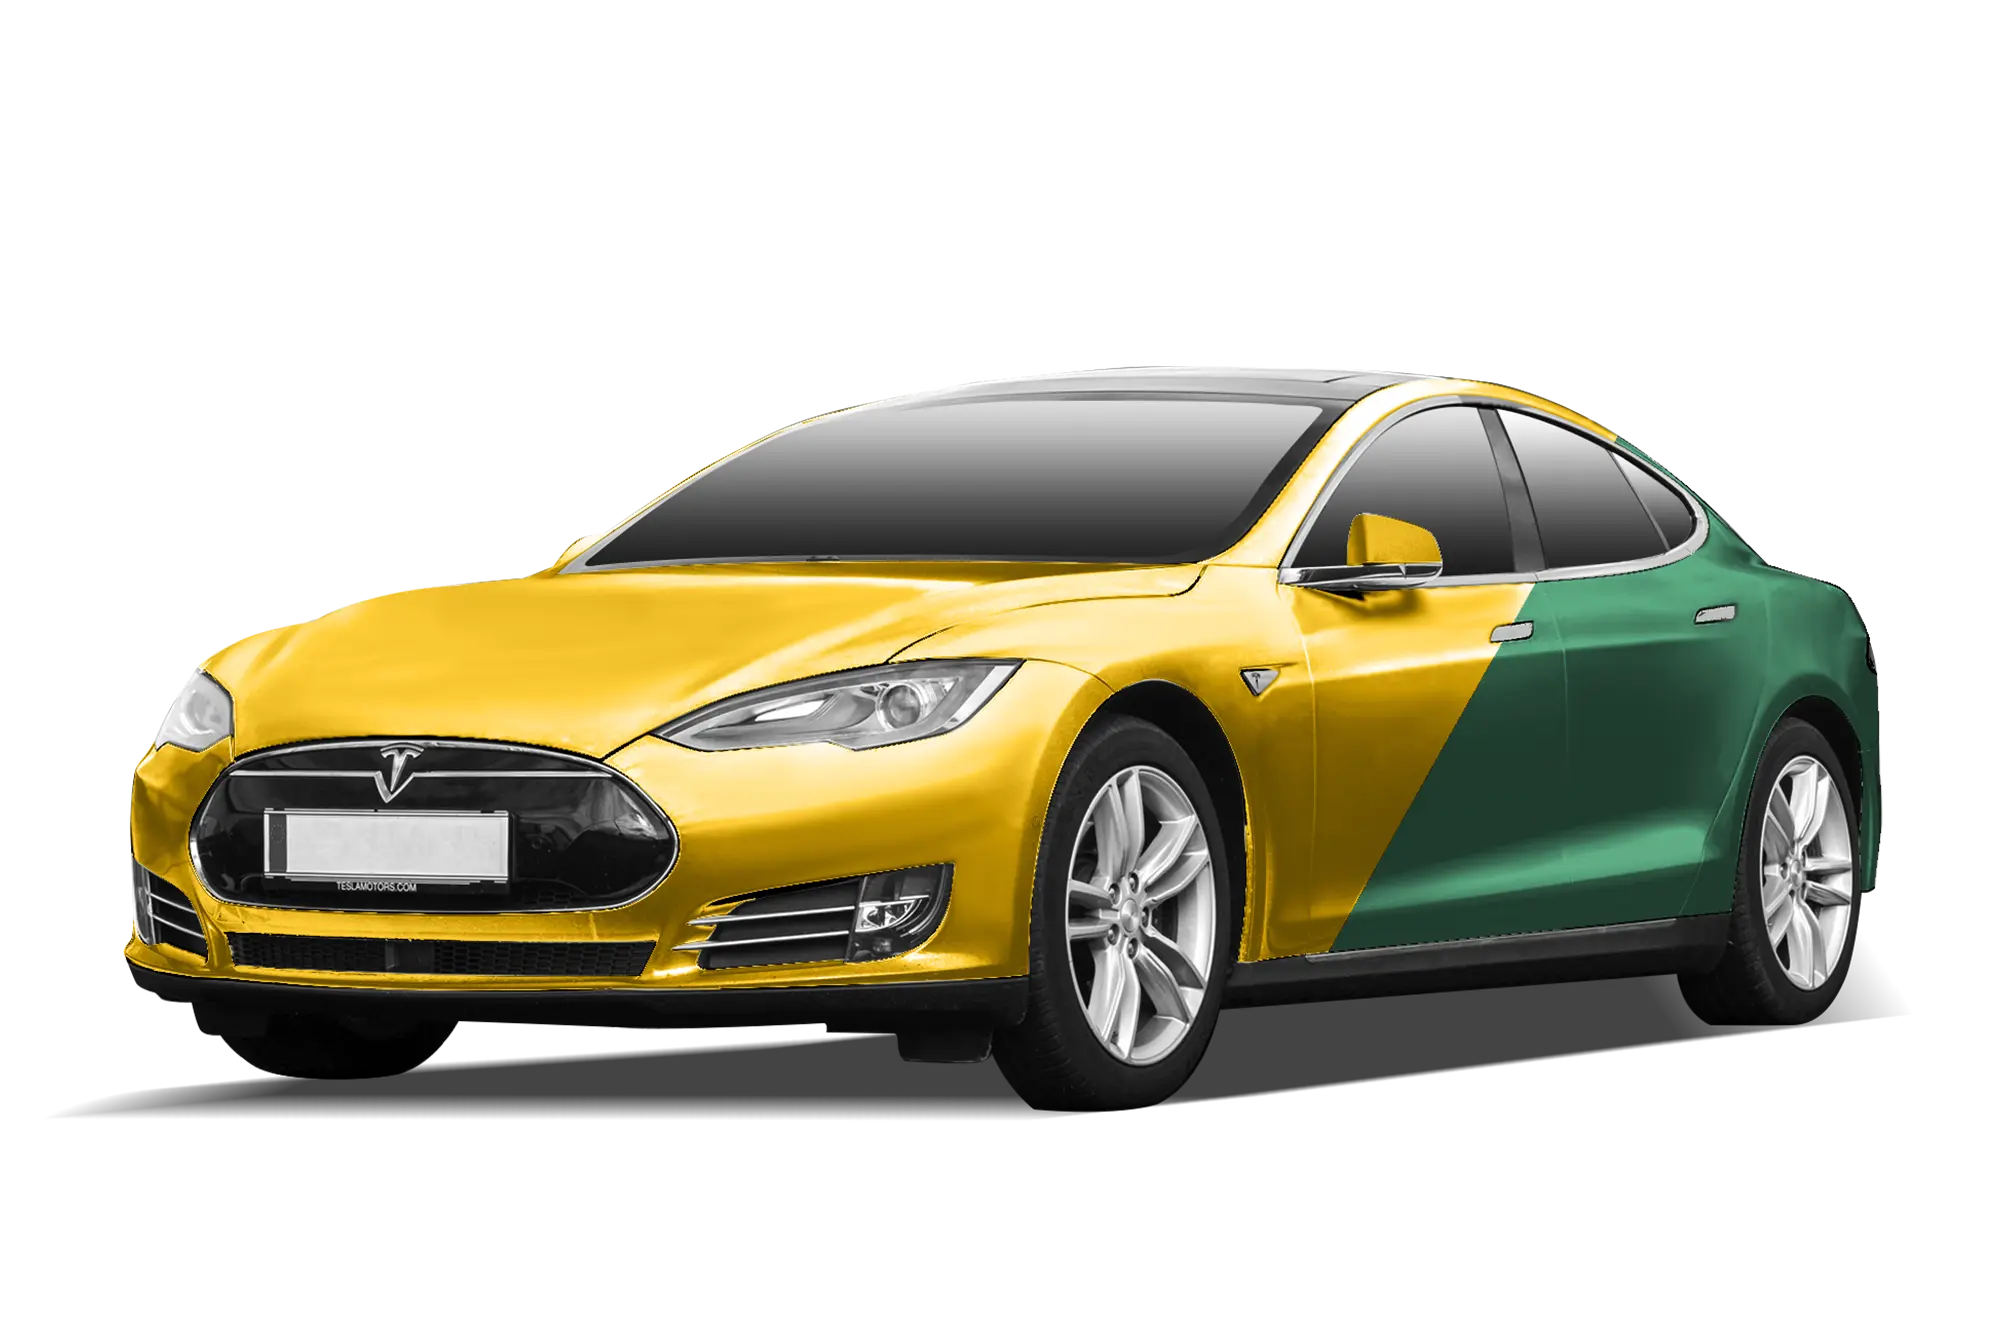 Tesla Model S Wraps  Vinyl Wrapping Services in Chicago